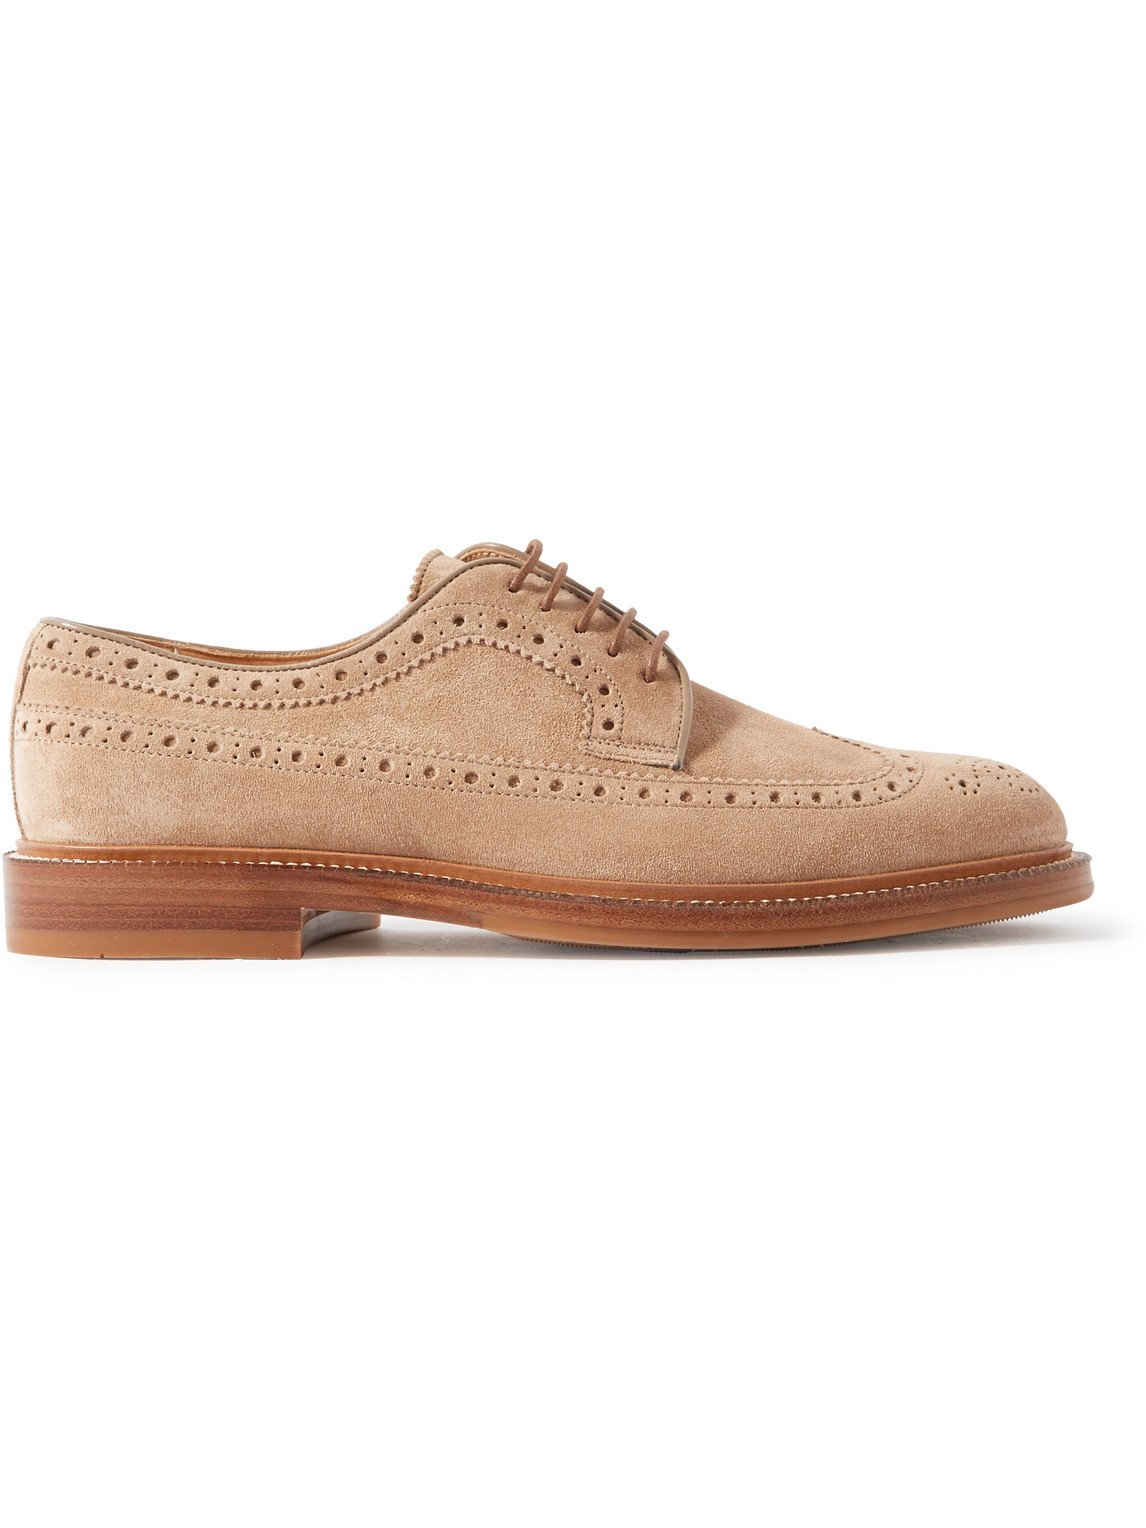 Brunello Cucinelli Longwing Brogue Derby Shoes In Neutrals